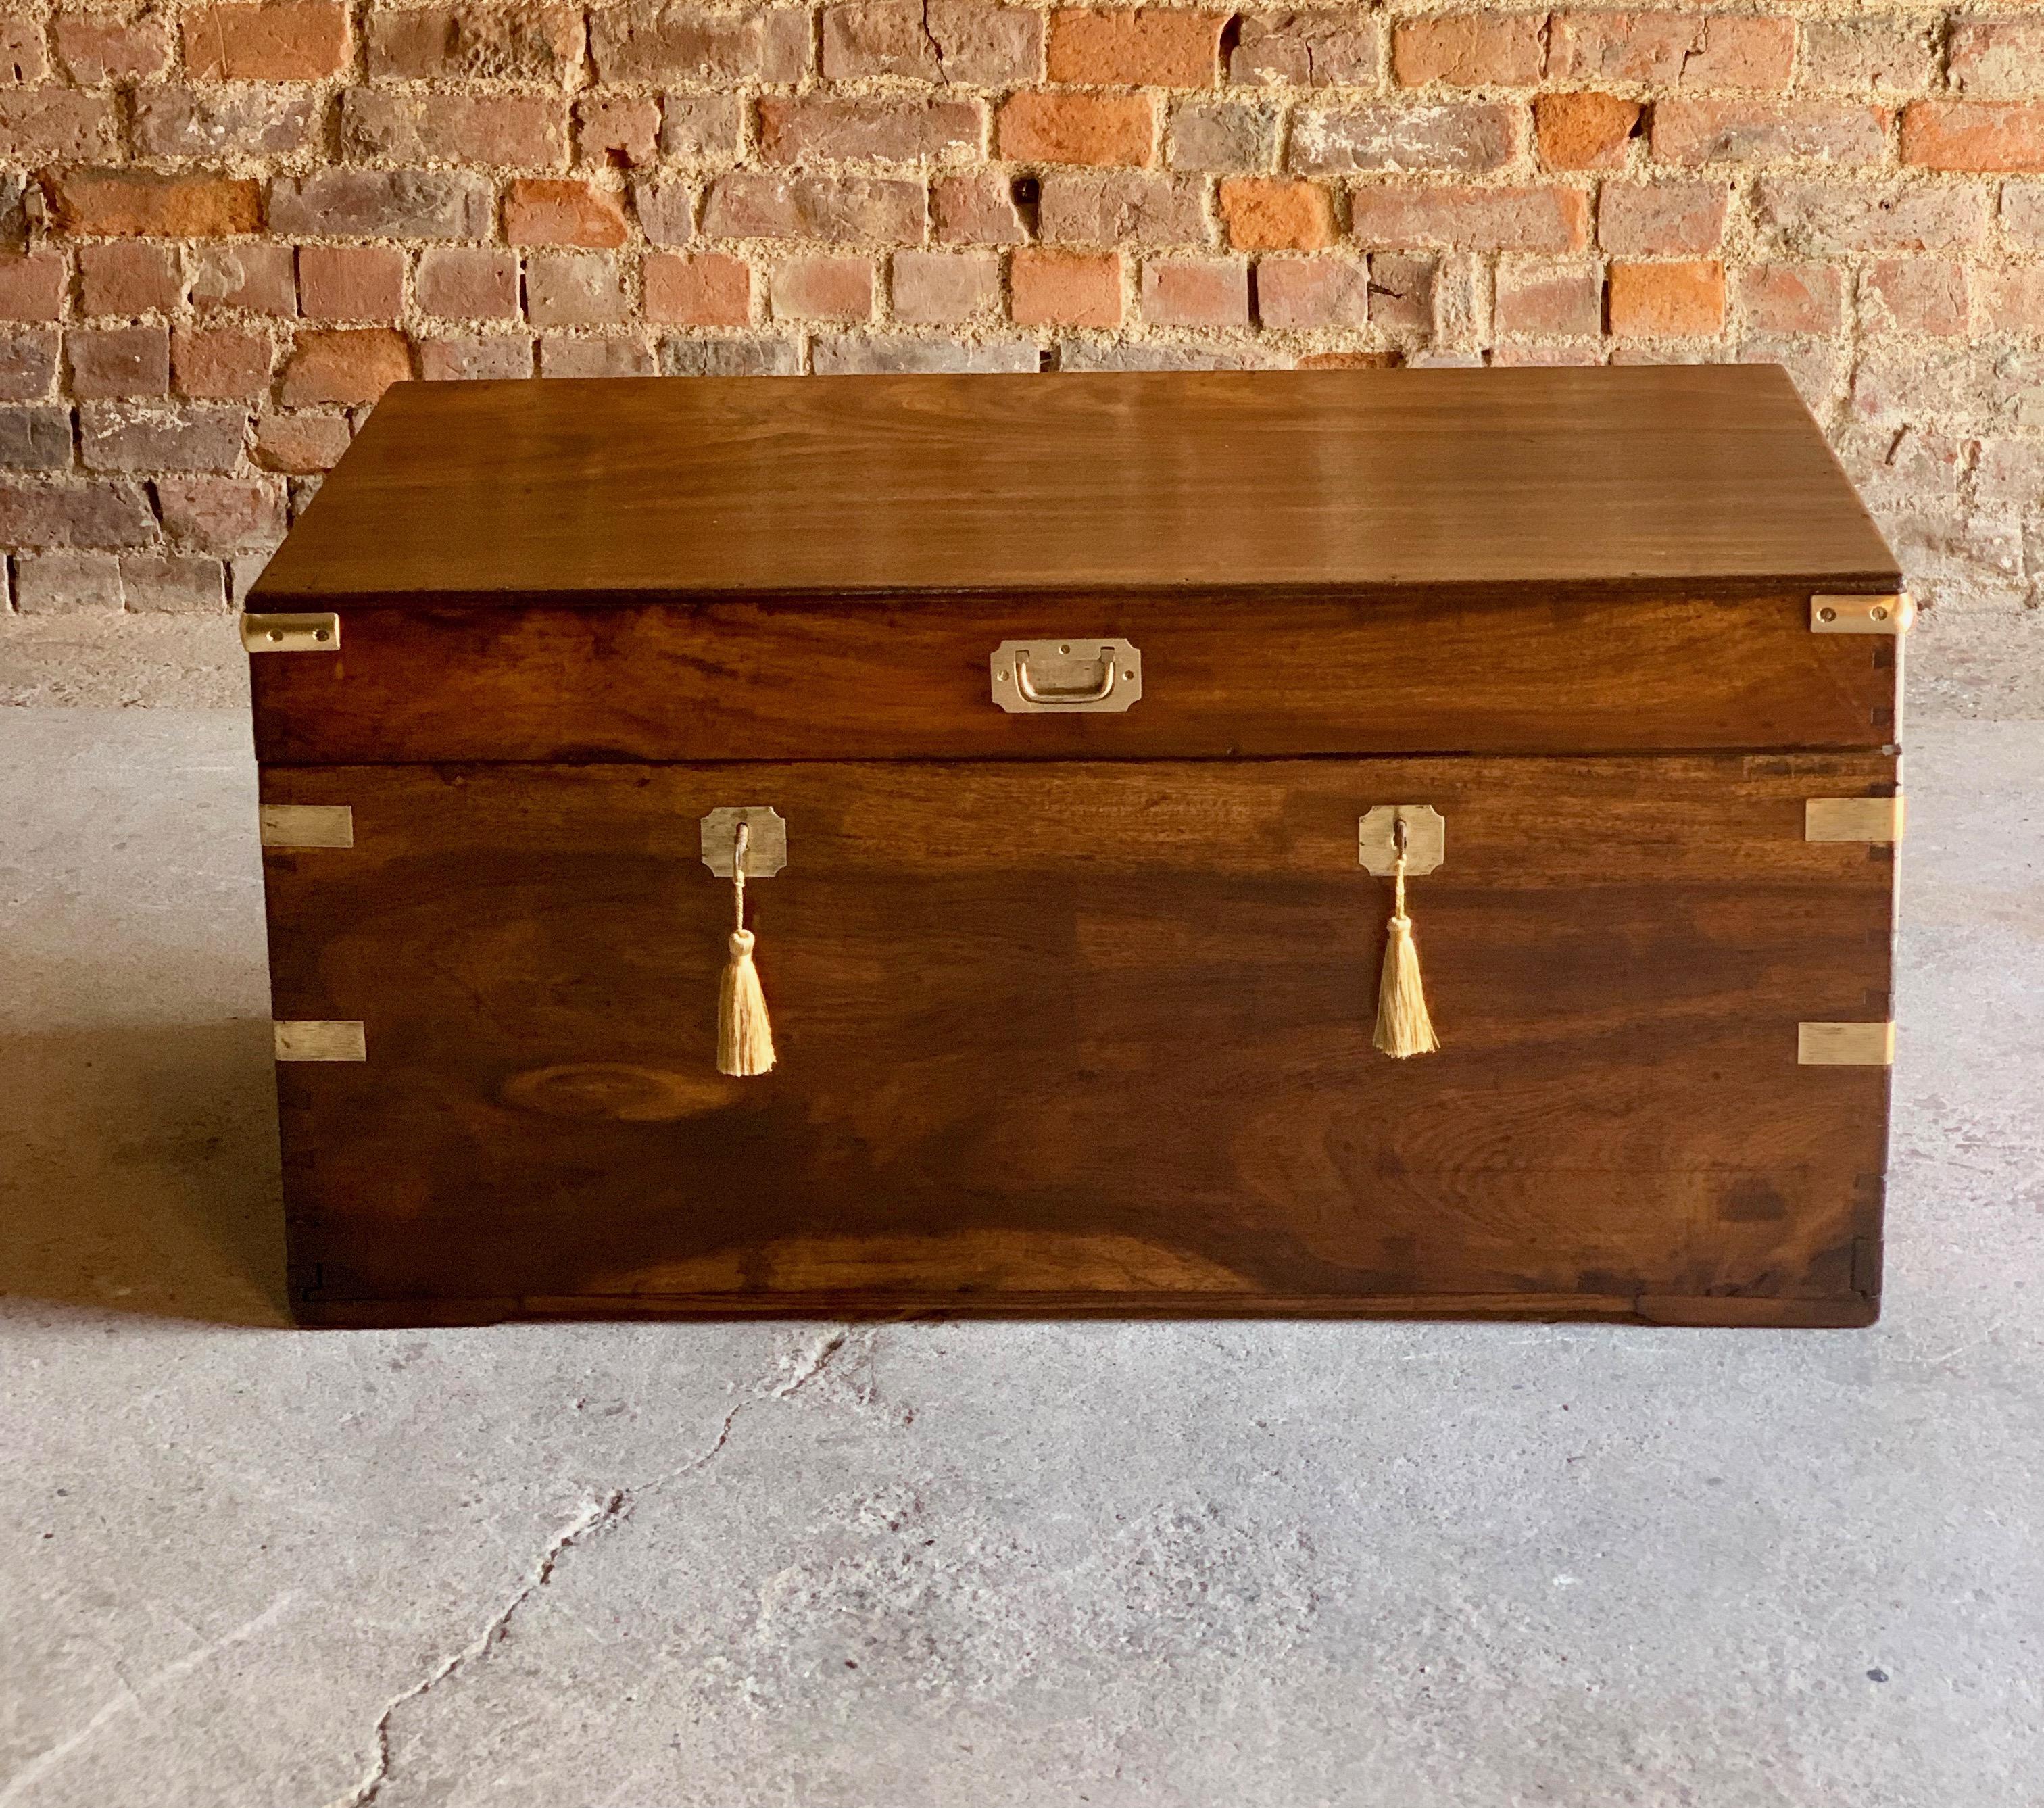 Victorian Military Campaign trunk chest teak camphor wood (circa 1850) number 25

Mid-19th century Victorian Anglo-Indian Colonial teak and camphor wood lined Campaign trunk circa 1850, (Number 25) The rectangular hinge lidded top with brass